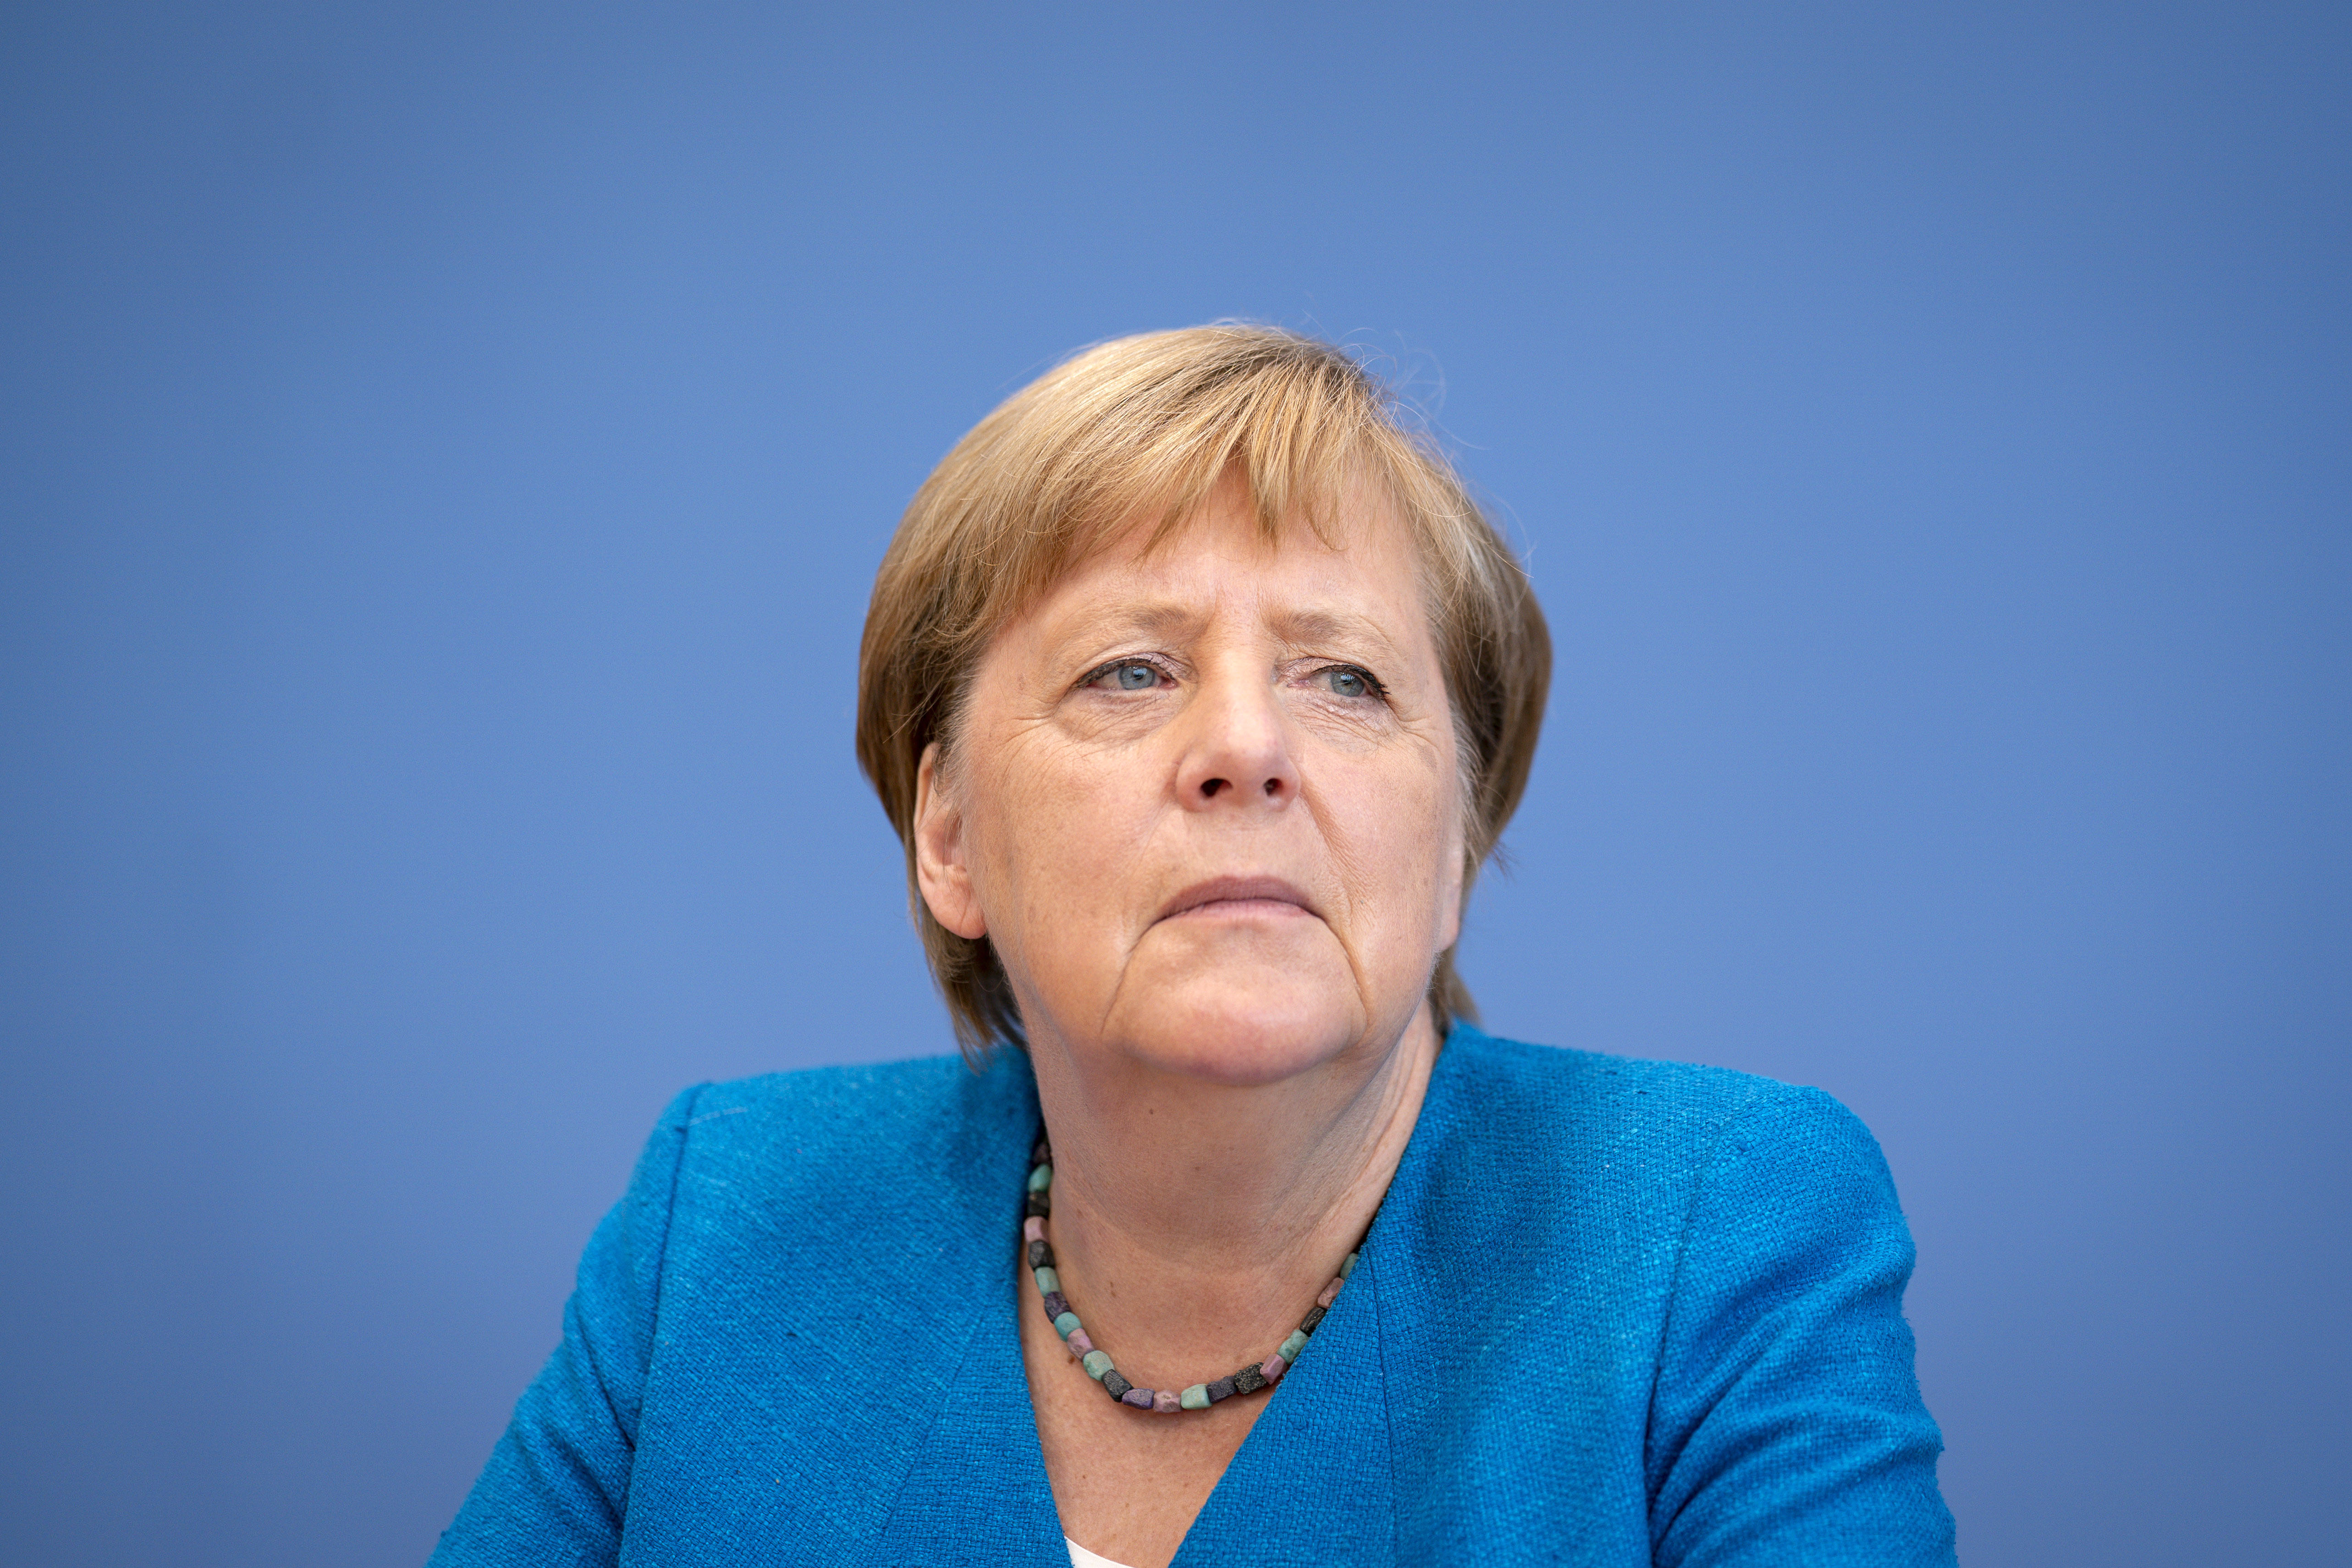 BERLIN, GERMANY - AUGUST 28: German Chancellor Angela Merkel speaks to the media at her annual summer press conference during the coronavirus pandemic on August 28, 2020 in Berlin, Germany. Merkel is likely to speak on a range of issues, including the pandemic and the economy. (Photo by Henning Schacht - Pool/ Getty Images)